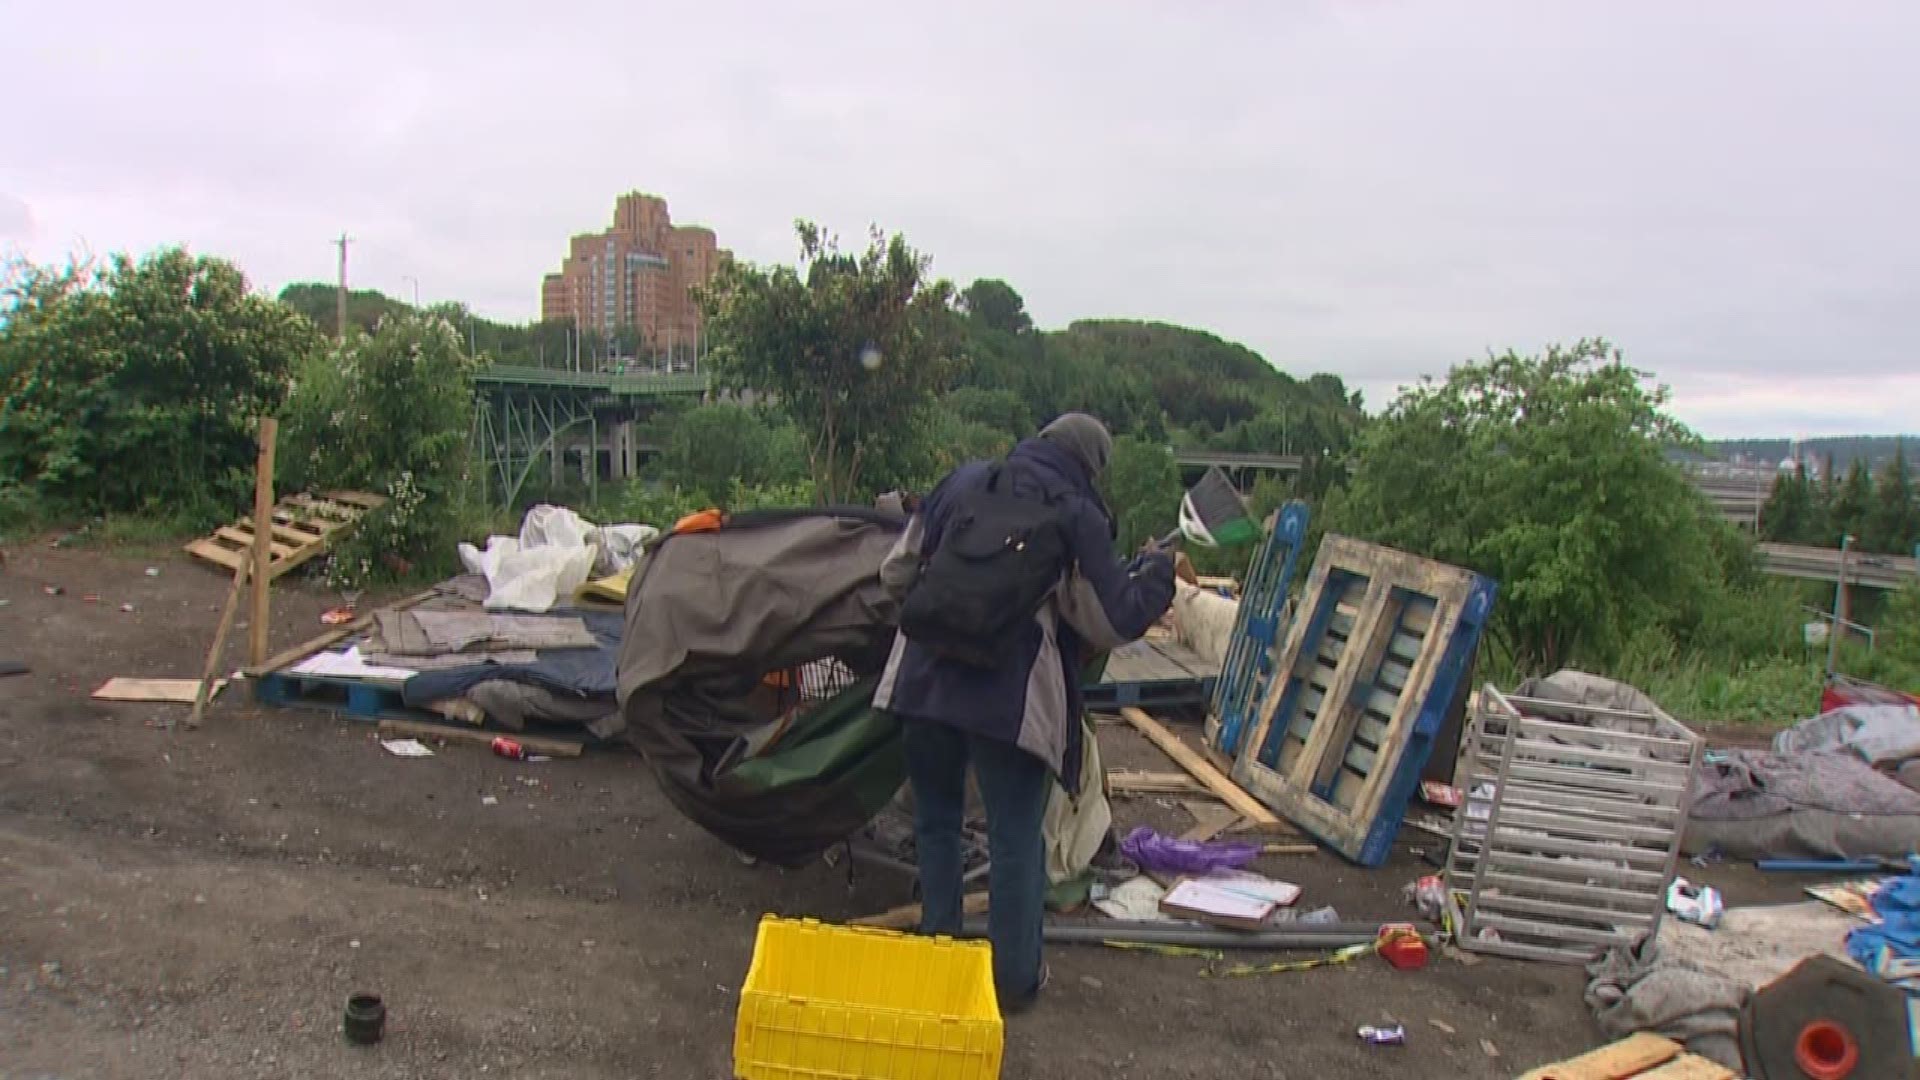 The State Department of Transportation will hire a crew to clean up homeless encampments.  It's part of the transportation budget signed this week - and comes after Seattle leaders pressured the state to be part of a regional solution.